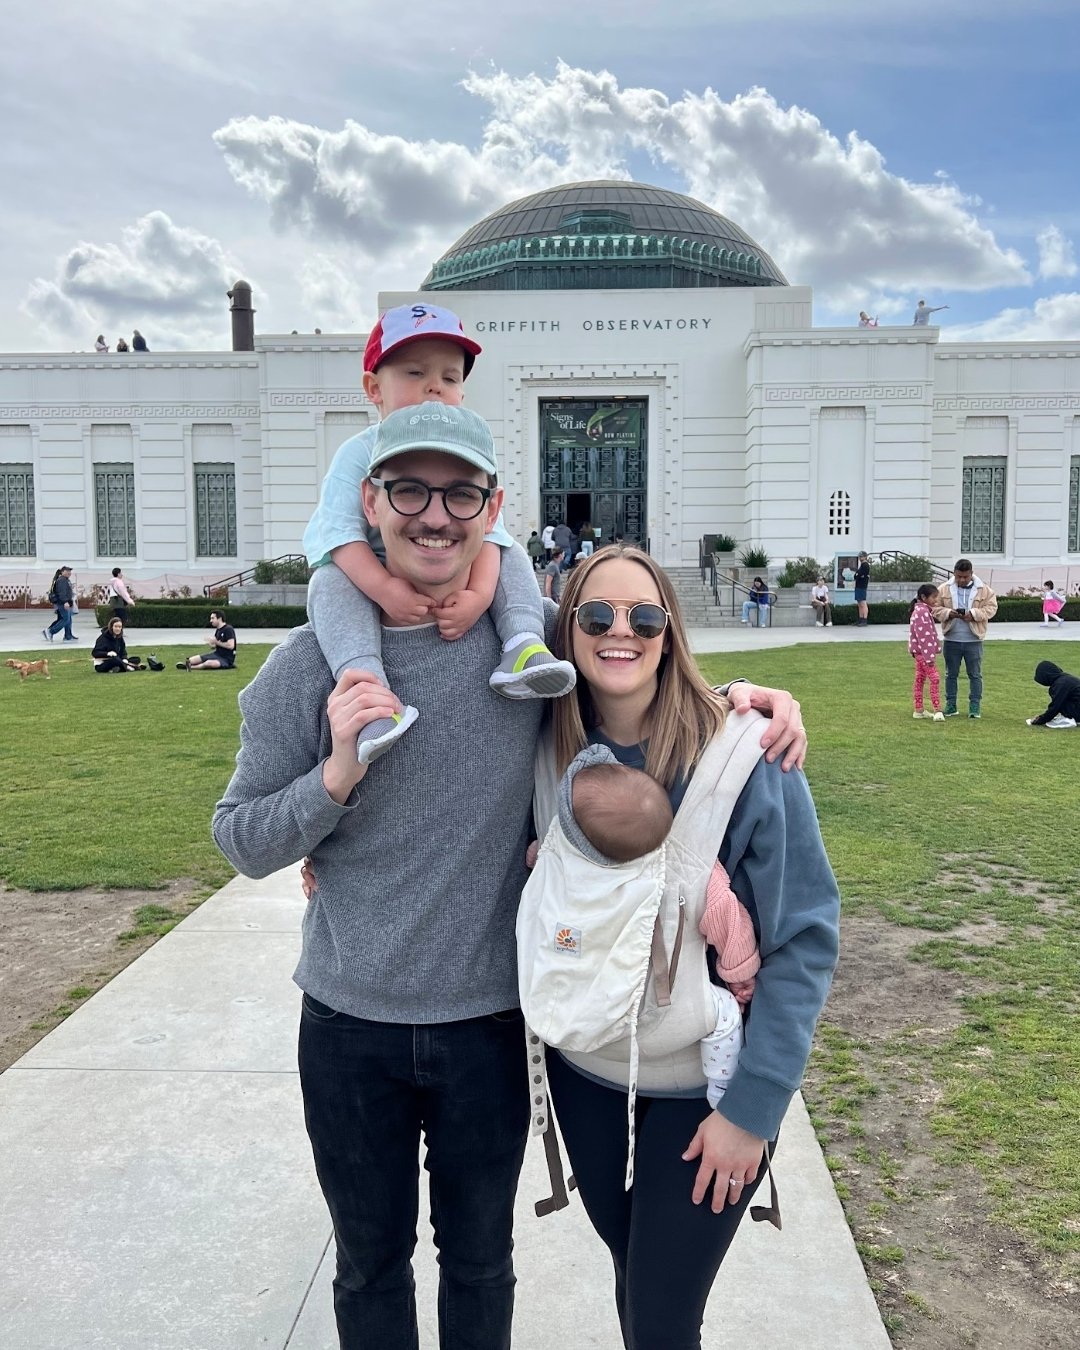 🌟 Meet our team!
Not just realtors, but also your neighbors and guides to finding a home and resources in Spokane. We're Branden and Kolby, and here's how we got here...

🚴 Branden&rsquo;s Spokane Story:
Branden spent his childhood visiting Spokane